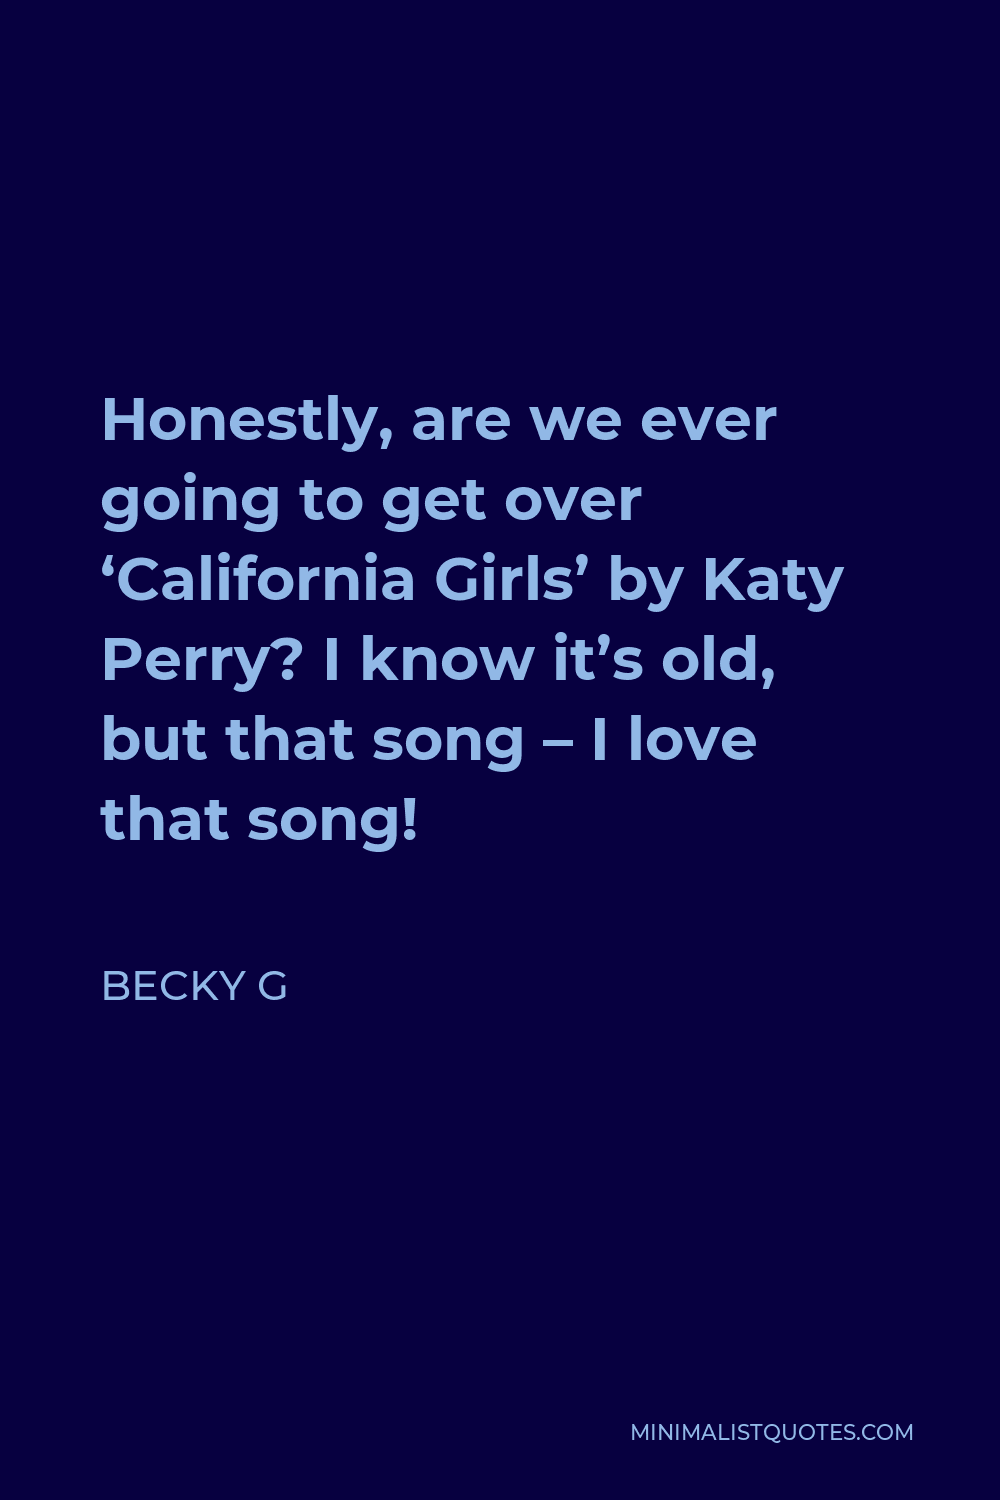 Becky G Quote - Honestly, are we ever going to get over ‘California Girls’ by Katy Perry? I know it’s old, but that song – I love that song!